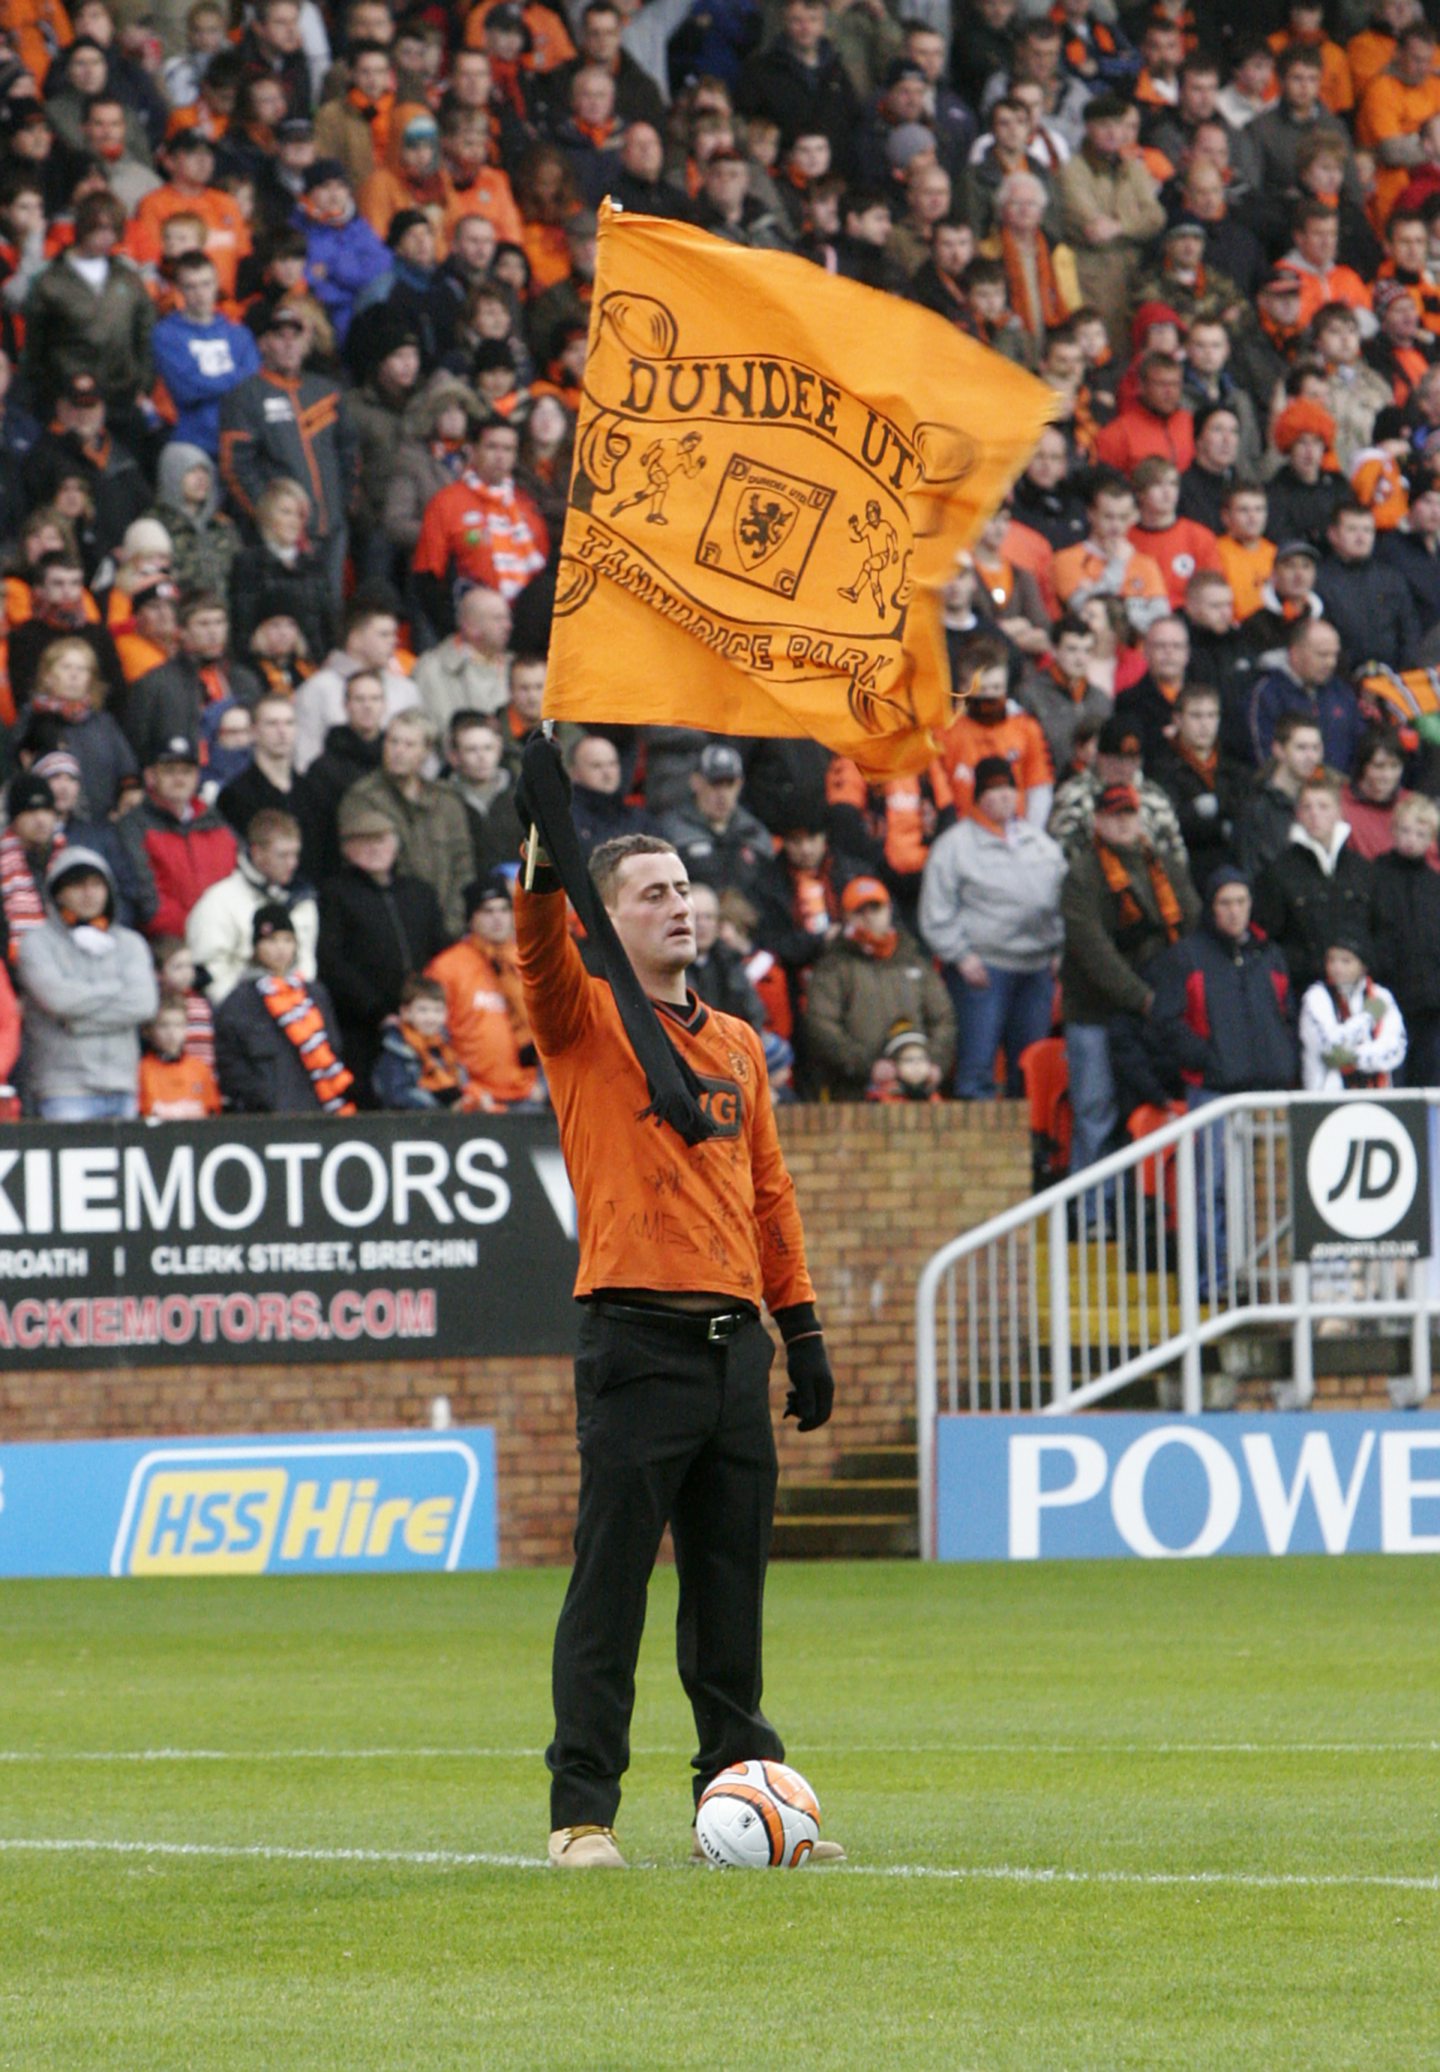 United fan Keith Whelan holds the club's flag aloft on the pitch at Tannadice. Image: DC Thomson.